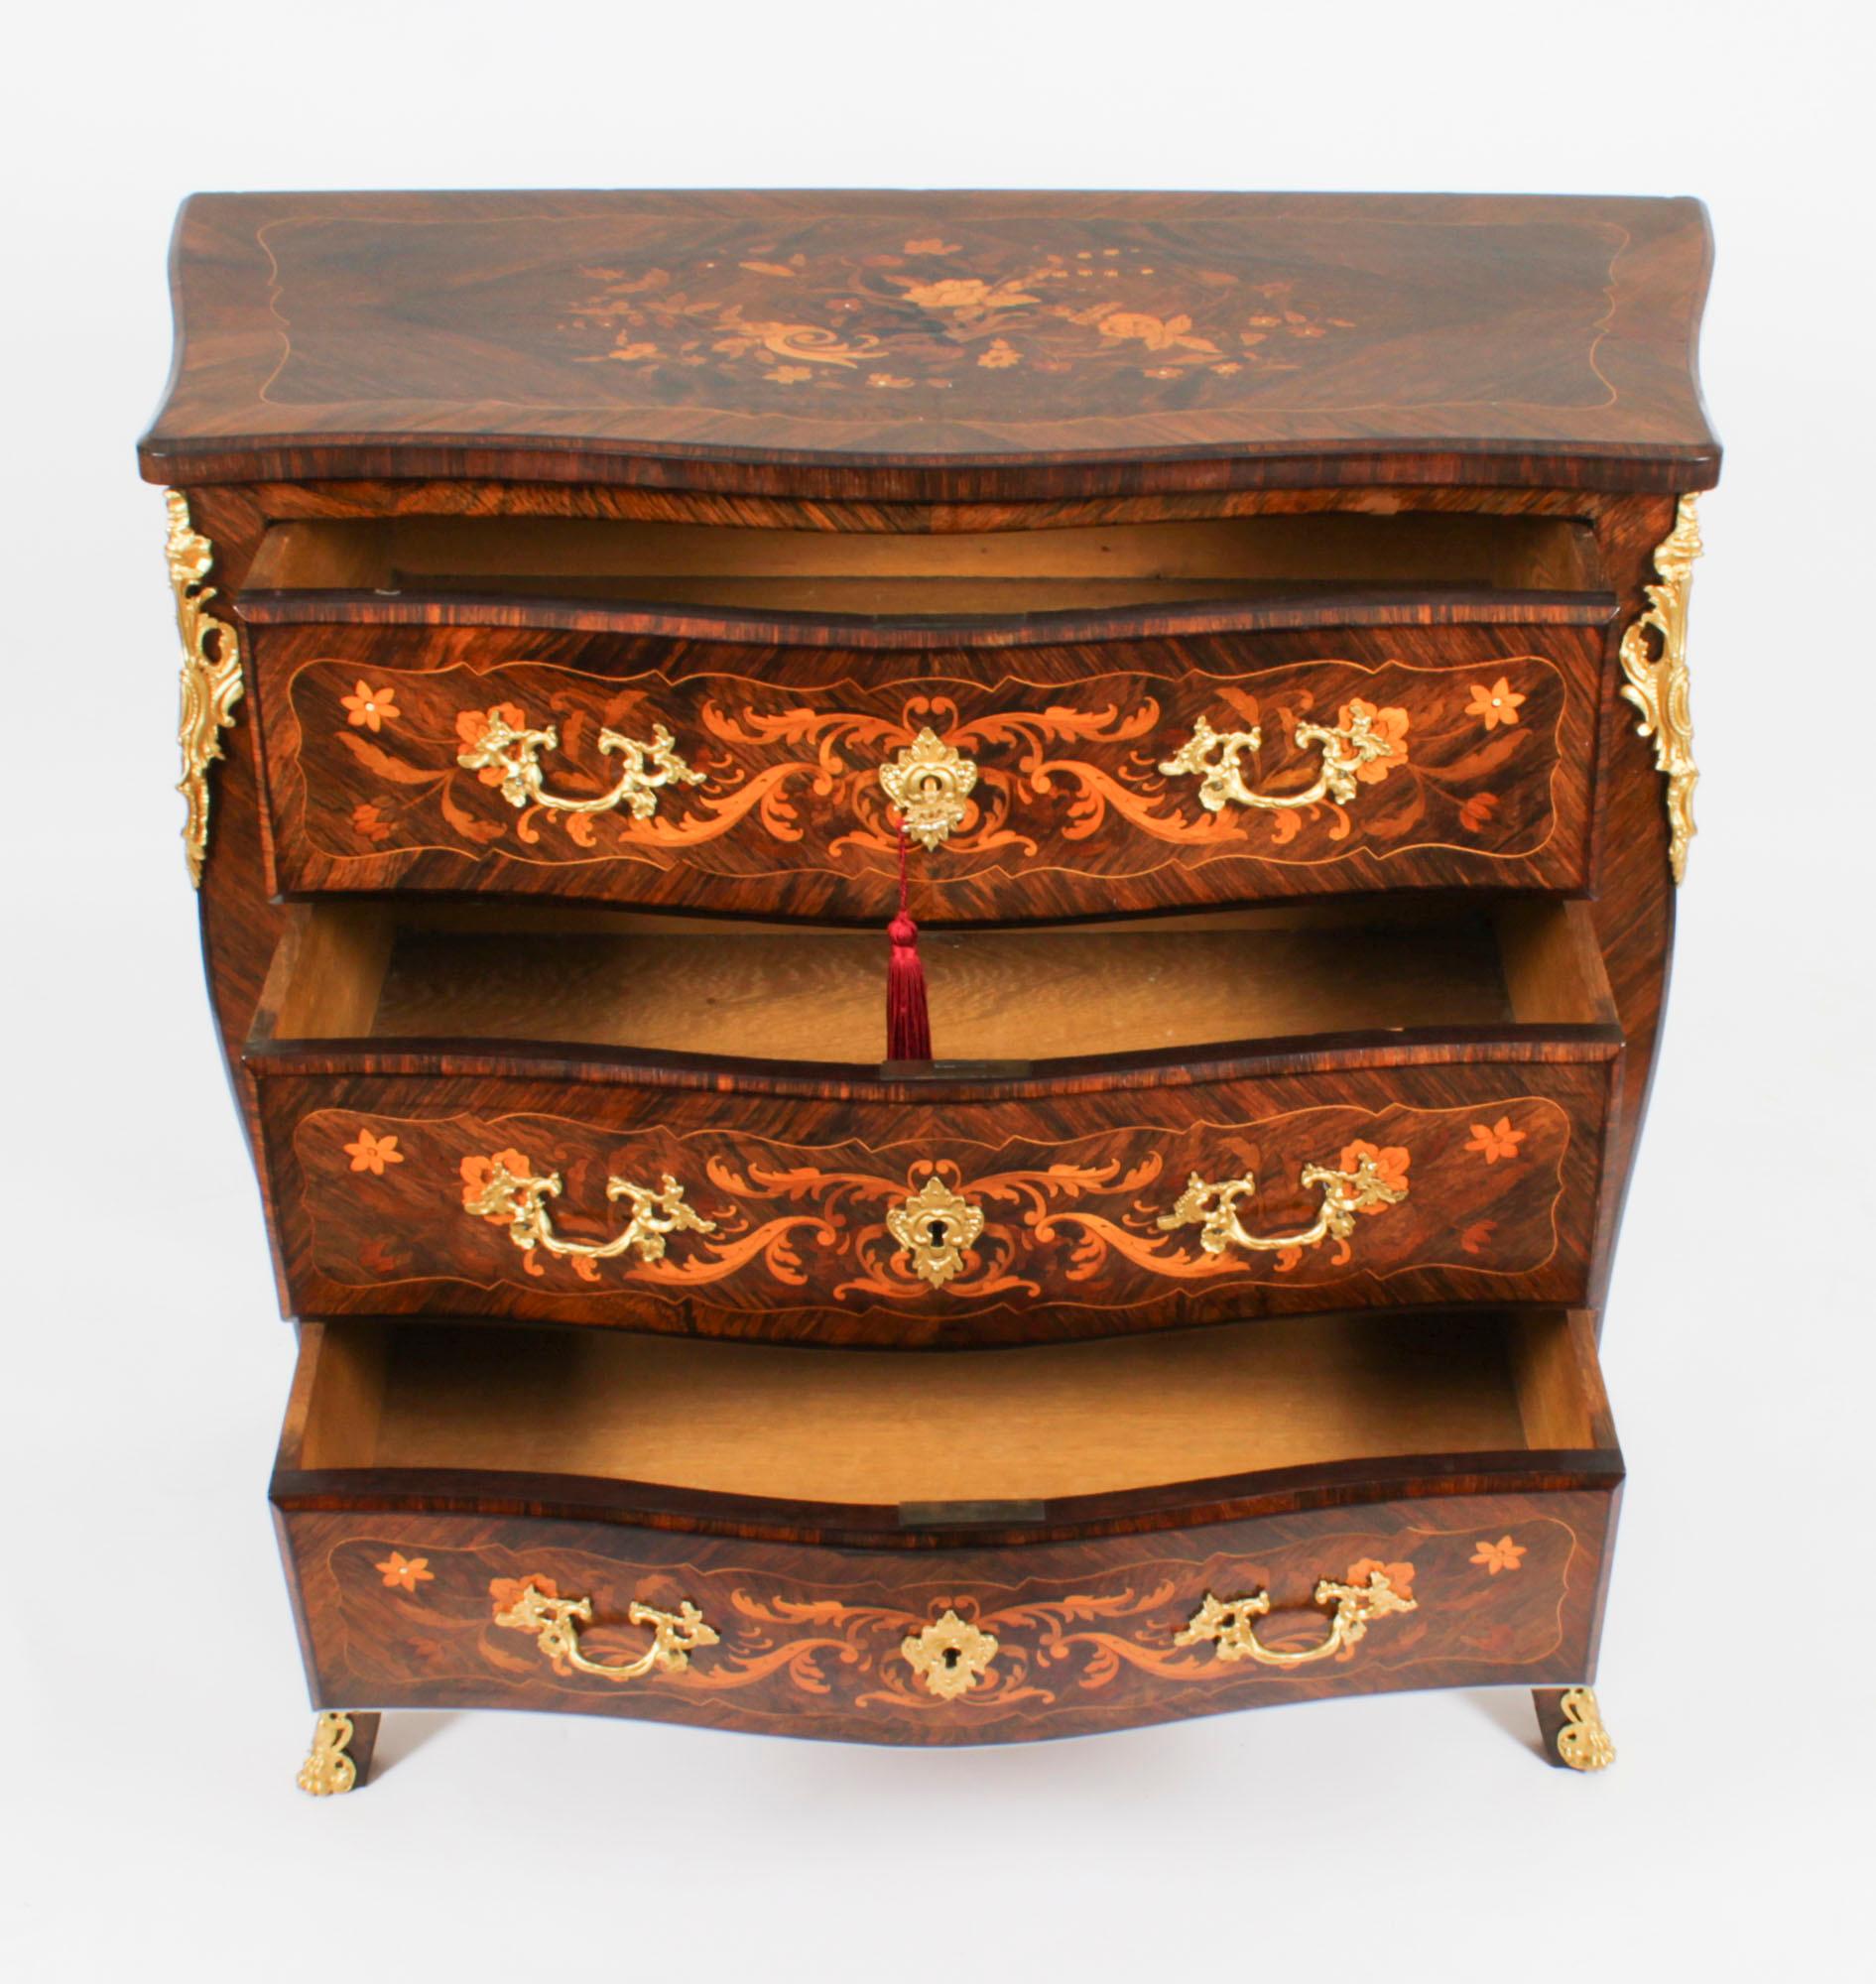 Antique French Louis Revival Marquetry Commode Chest of Drawers 19th Century For Sale 13